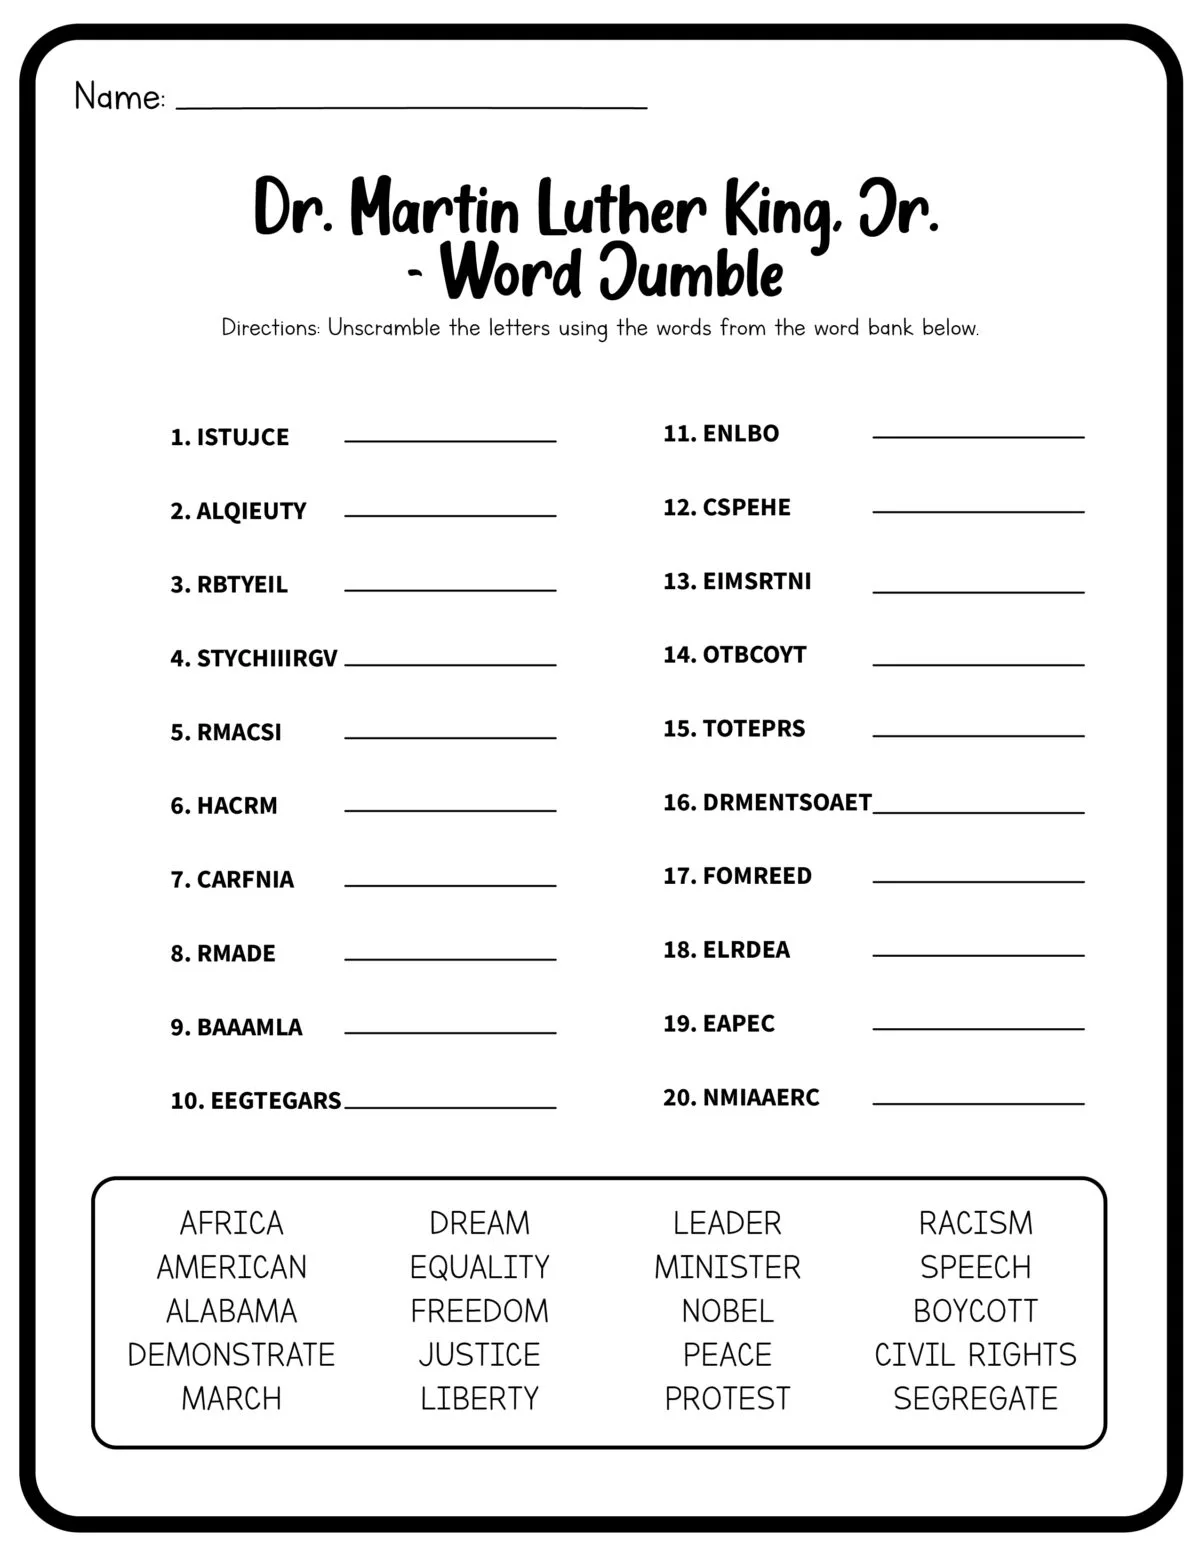 Celebrate the legacy of Martin Luther King, Jr. with these free worksheets for kids! Includes word searches, writing prompts, and more.